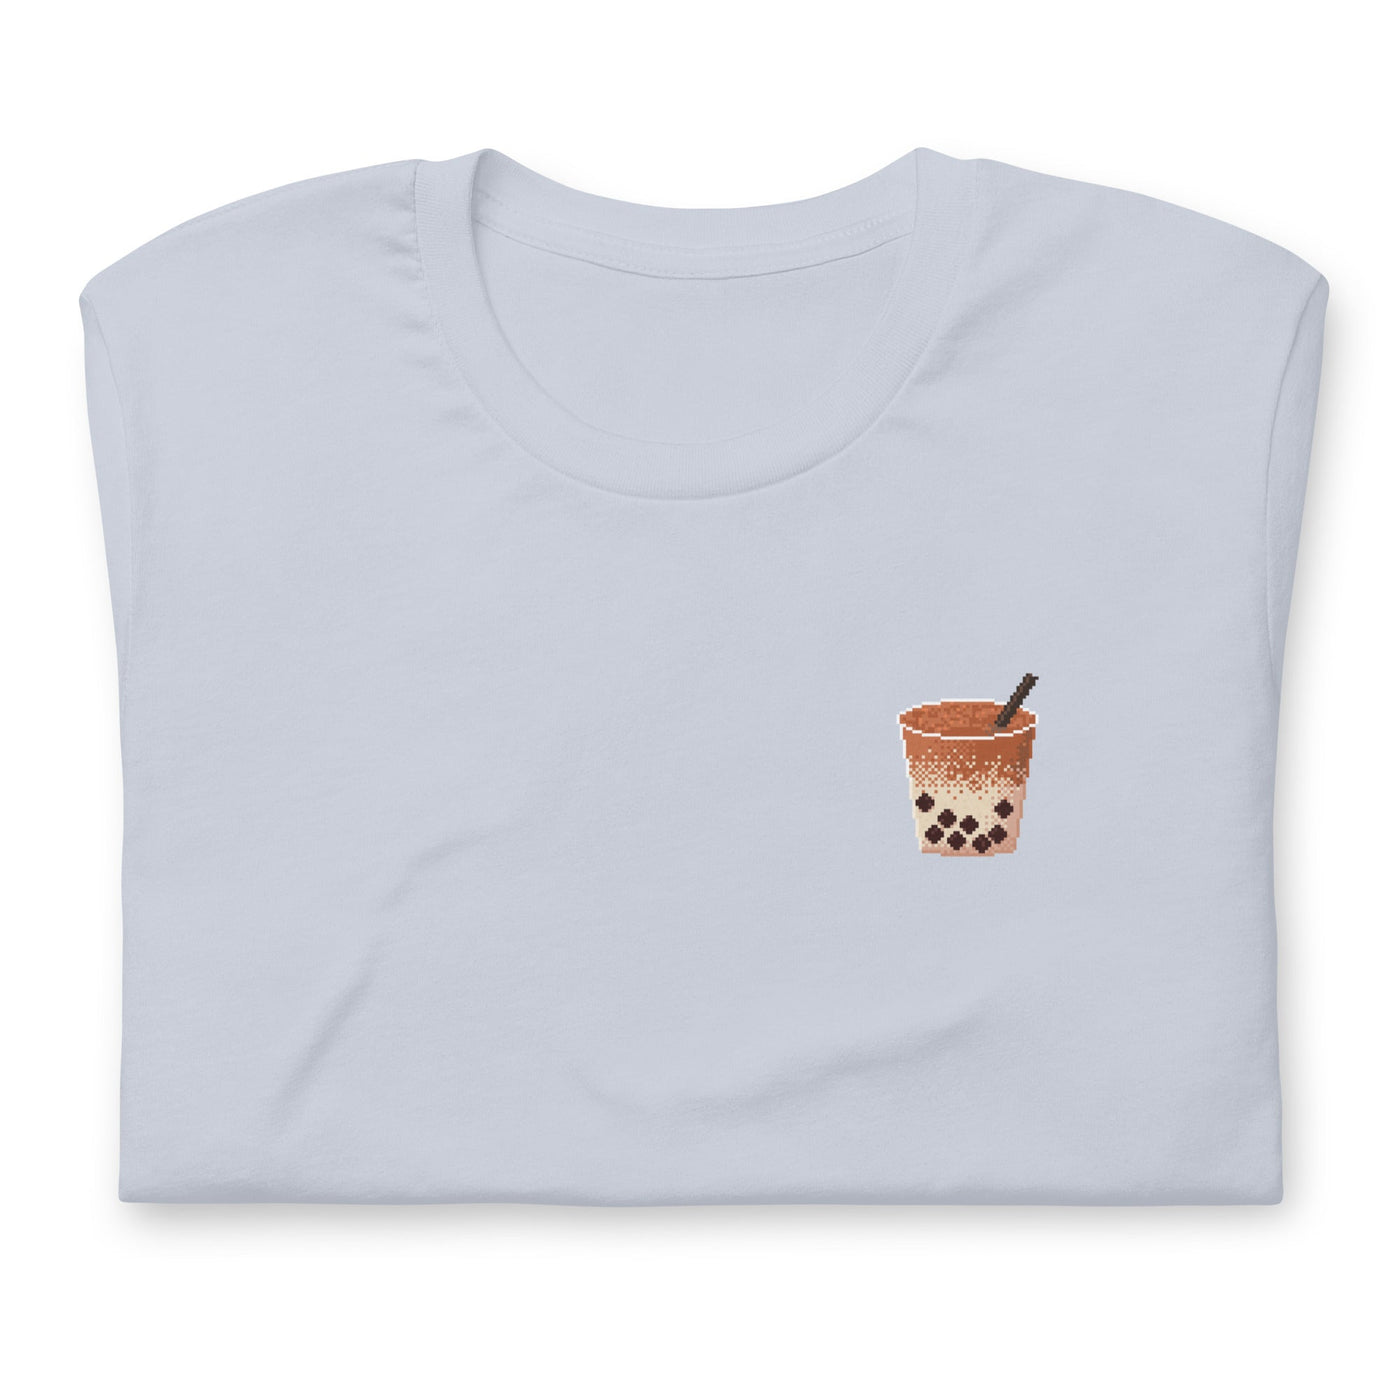 Pixel Boba | Unisex t-shirt | Cozy Gamer Threads and Thistles Inventory Light Blue XS 